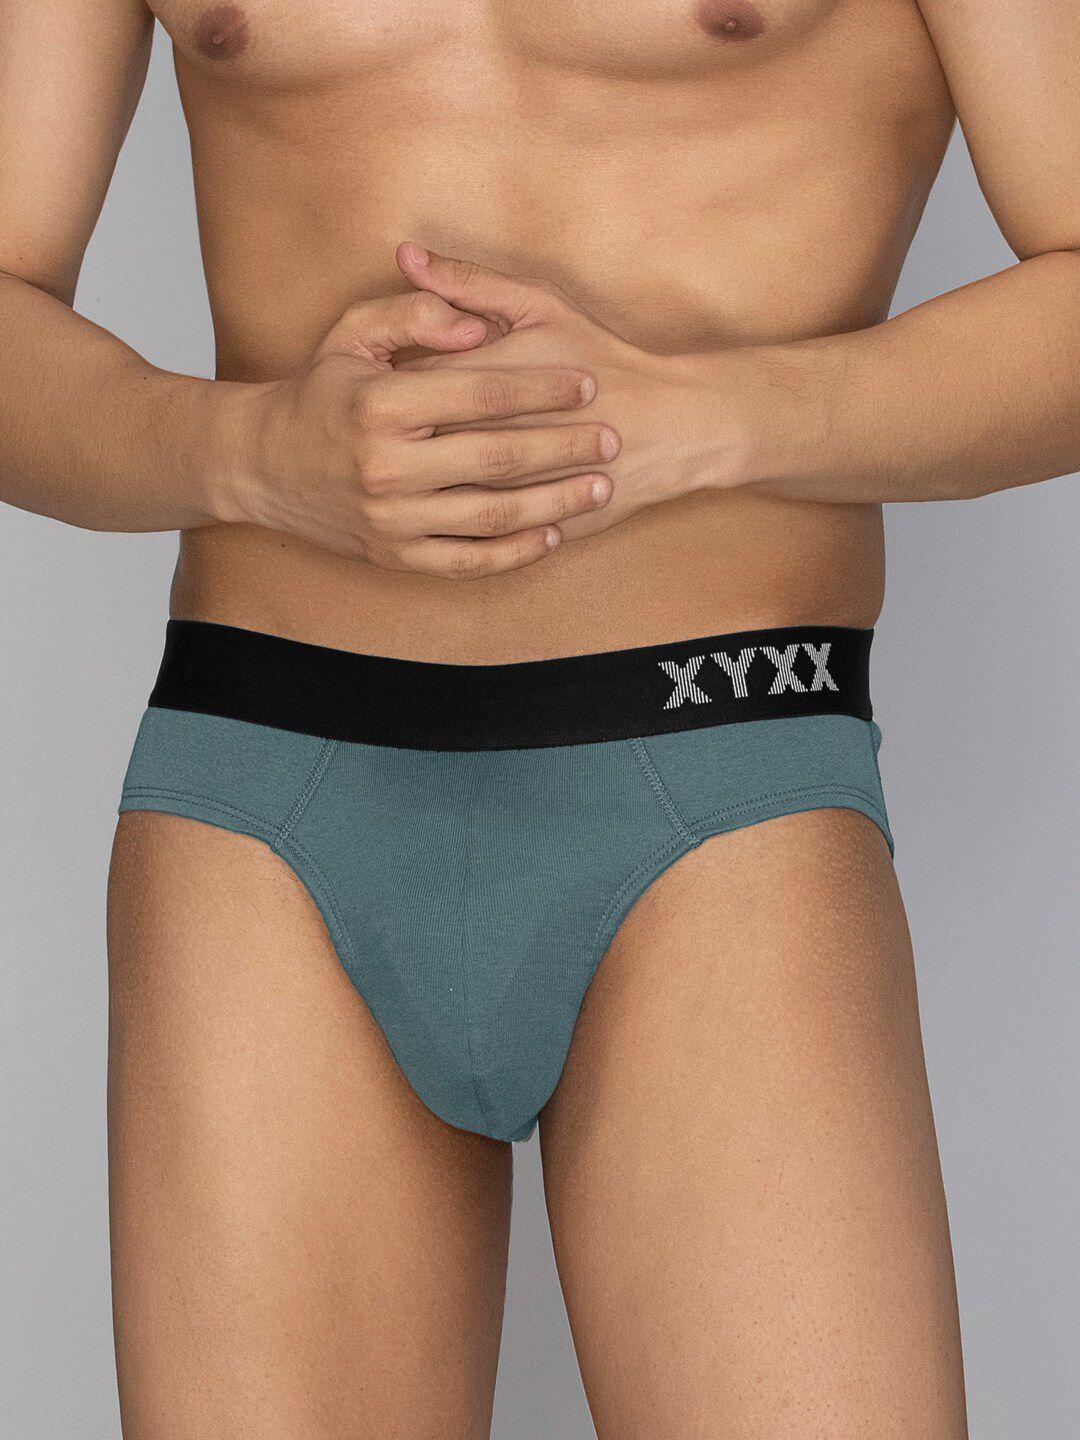 XYXX Men Combed Cotton Pace Briefs - XYBRF178